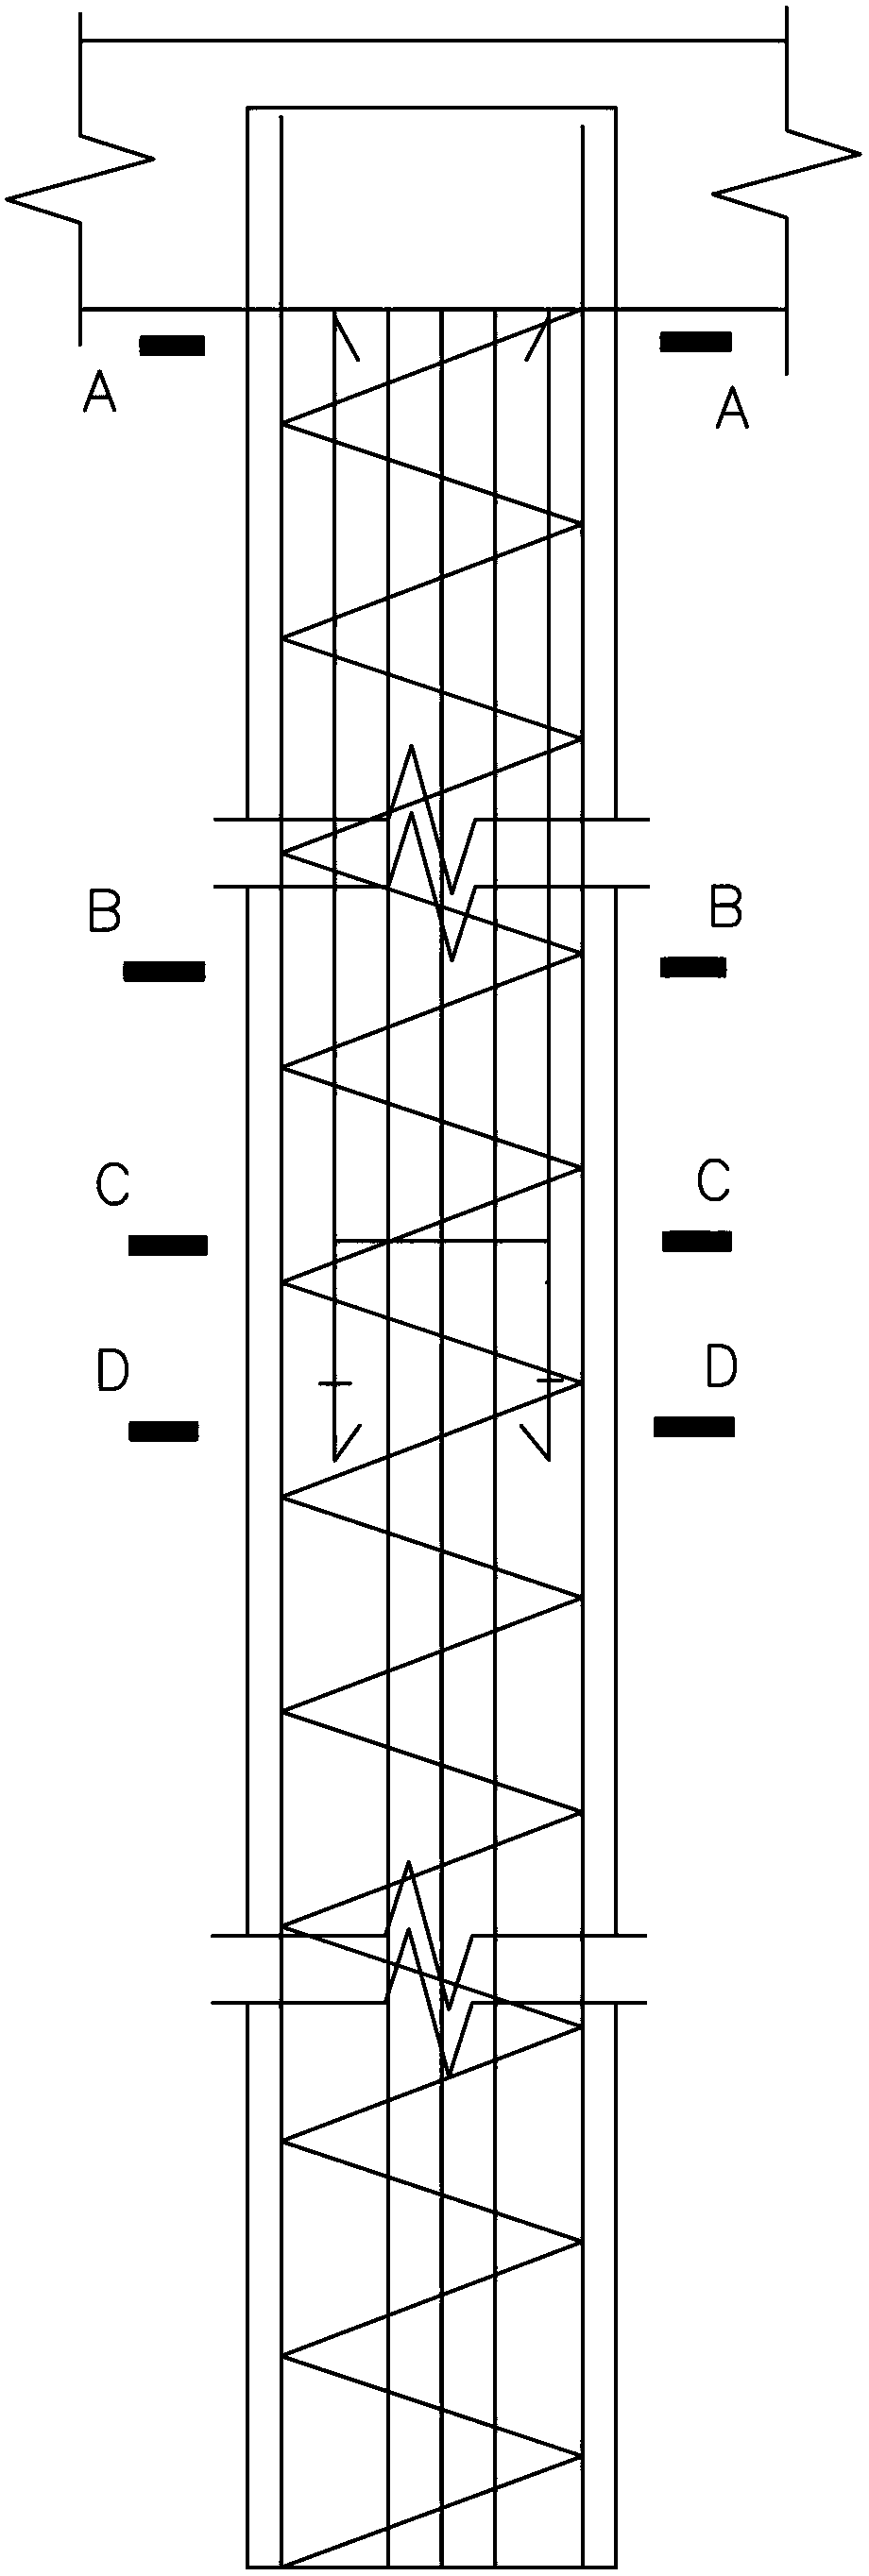 Bonded post-tensioned prestressed anchoring construction method for cast-in-place concrete structure